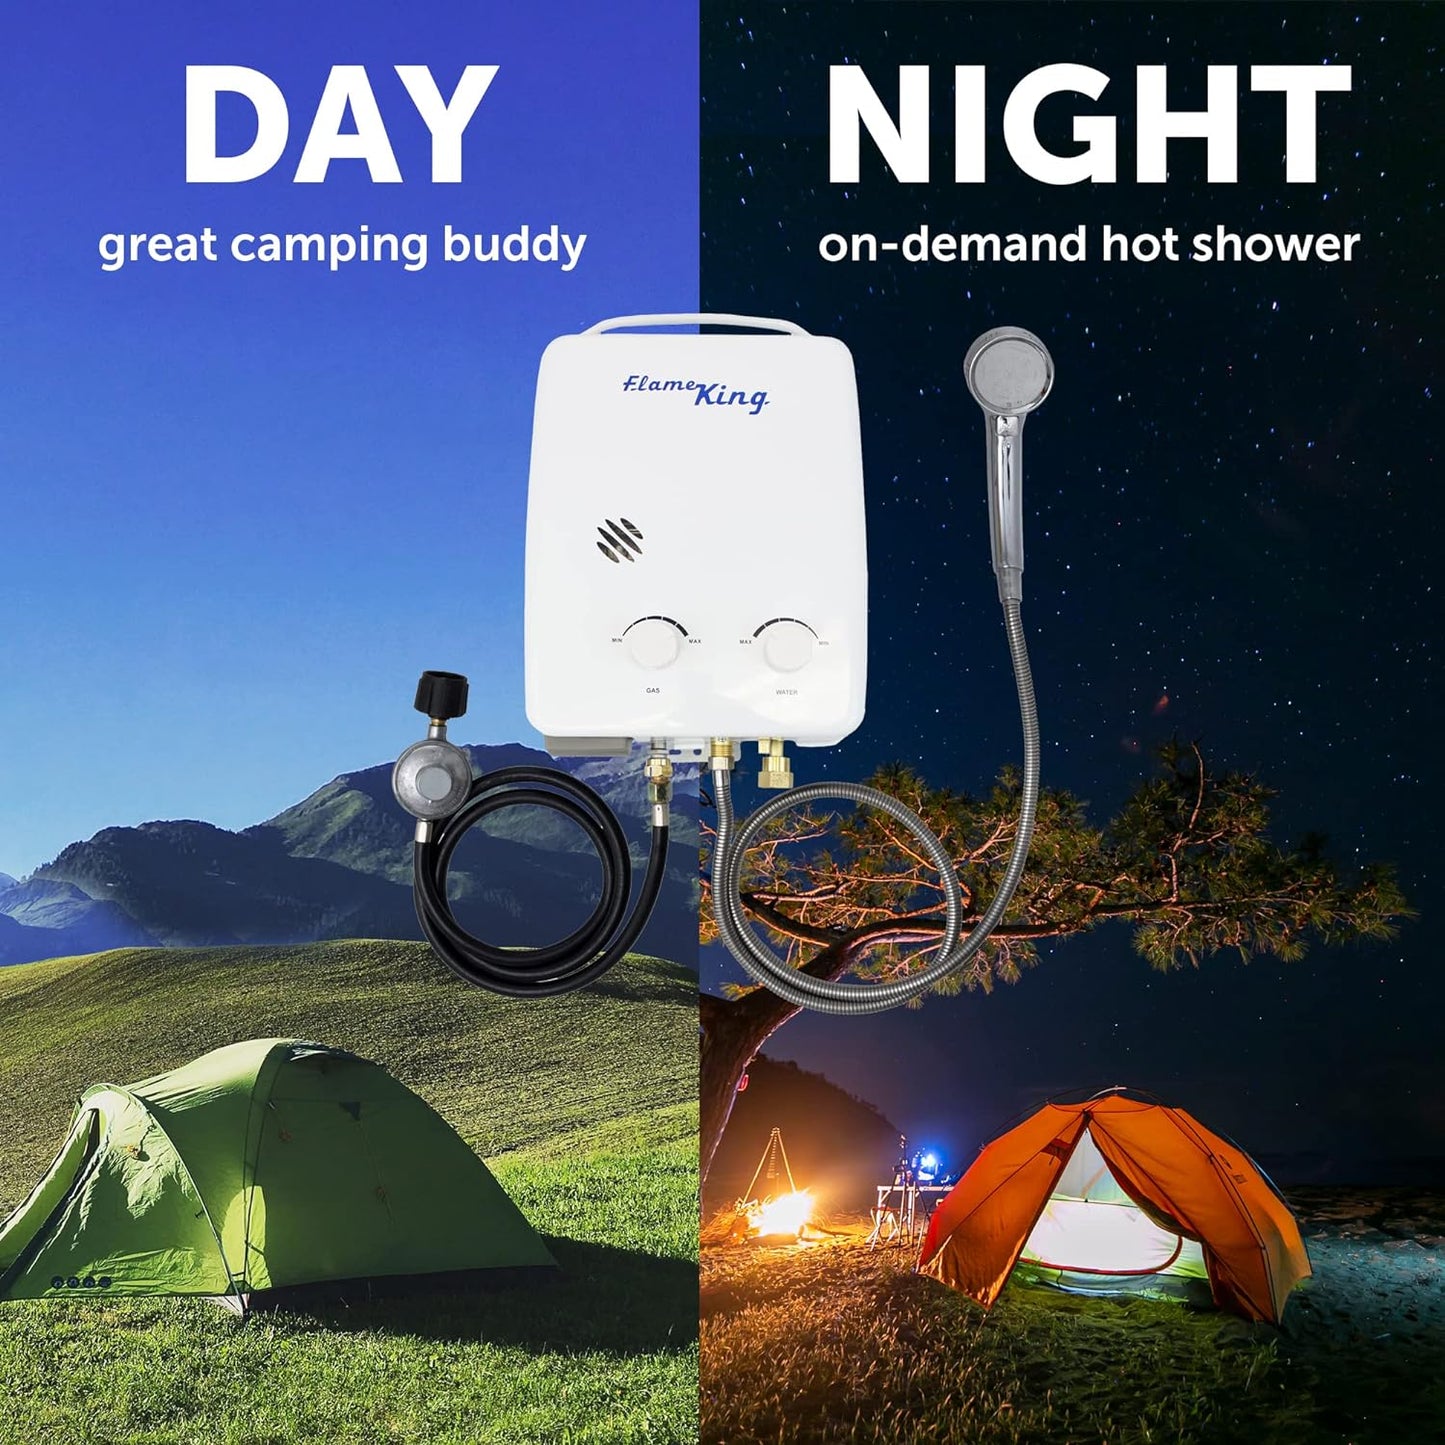 Flame King YSNAZ132 Portable Tankless Water Heater Propane Gas 5L 1.32GPM at 34,000 BTU, Outdoor Instant Hot Water Sho